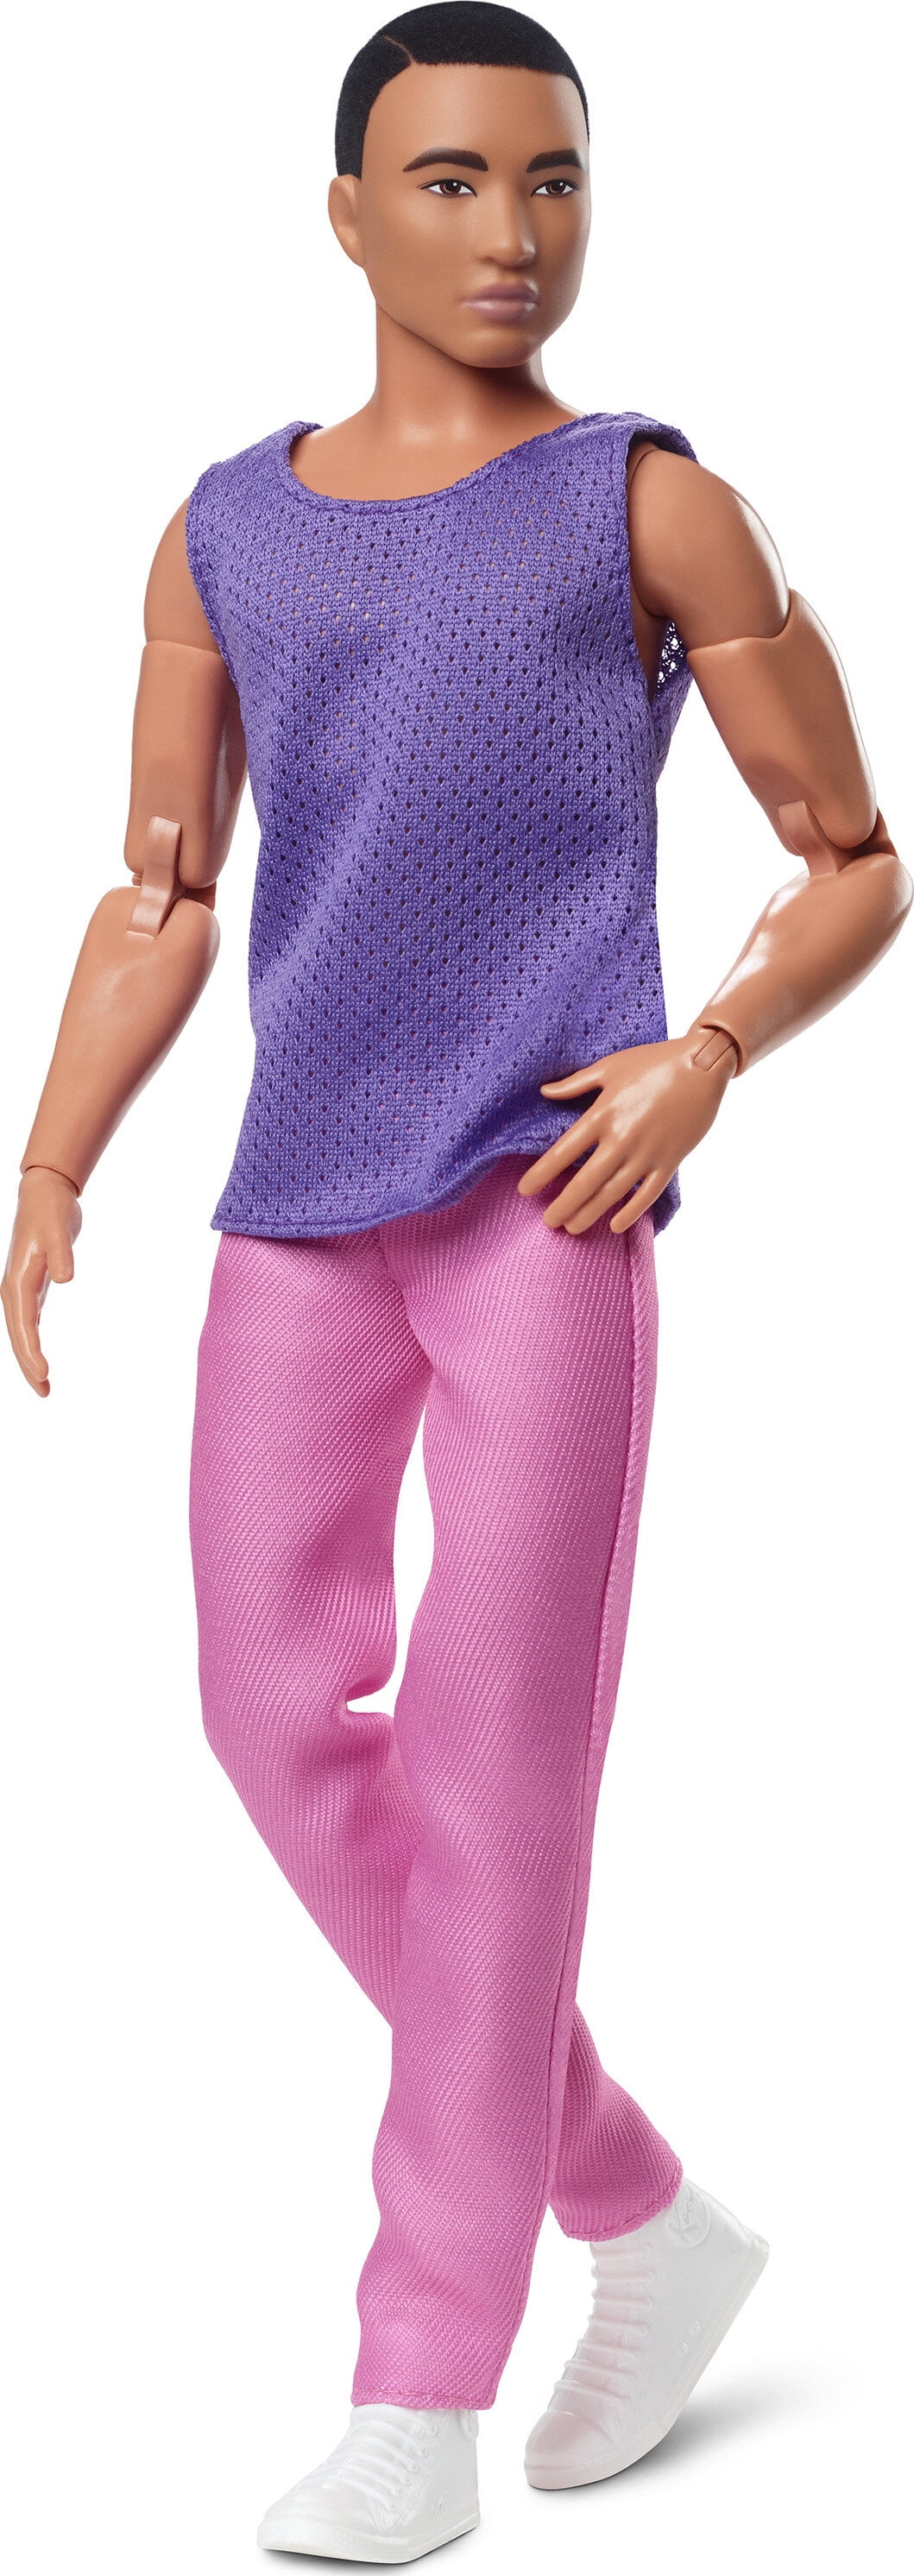 Doll Clothes Barbie Pink Pants